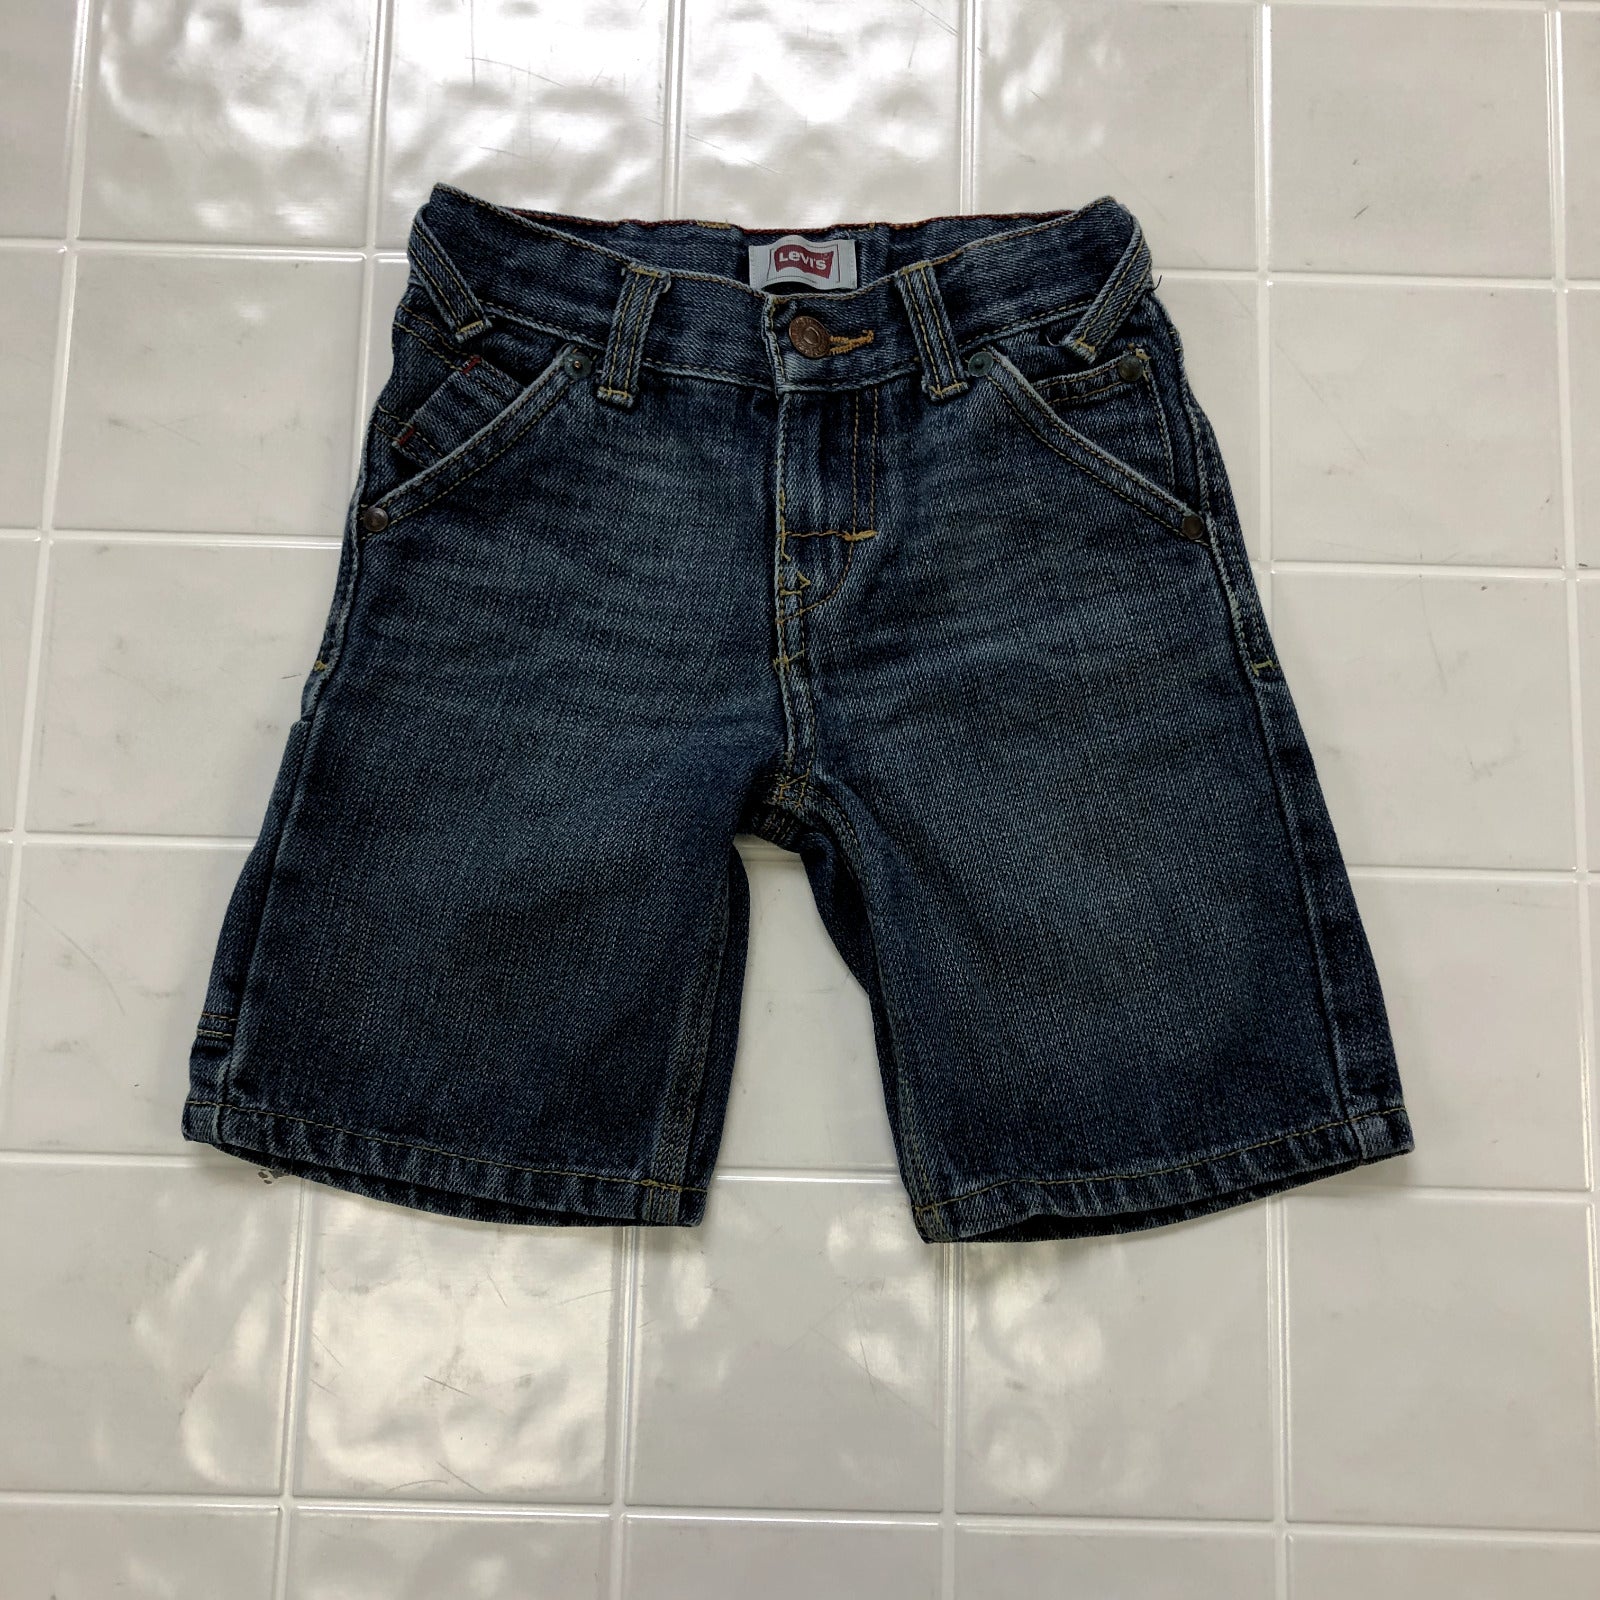 Levi's Blue Denim Flat Front Chino Regular Fit Relax Shorts Youth Size 4T